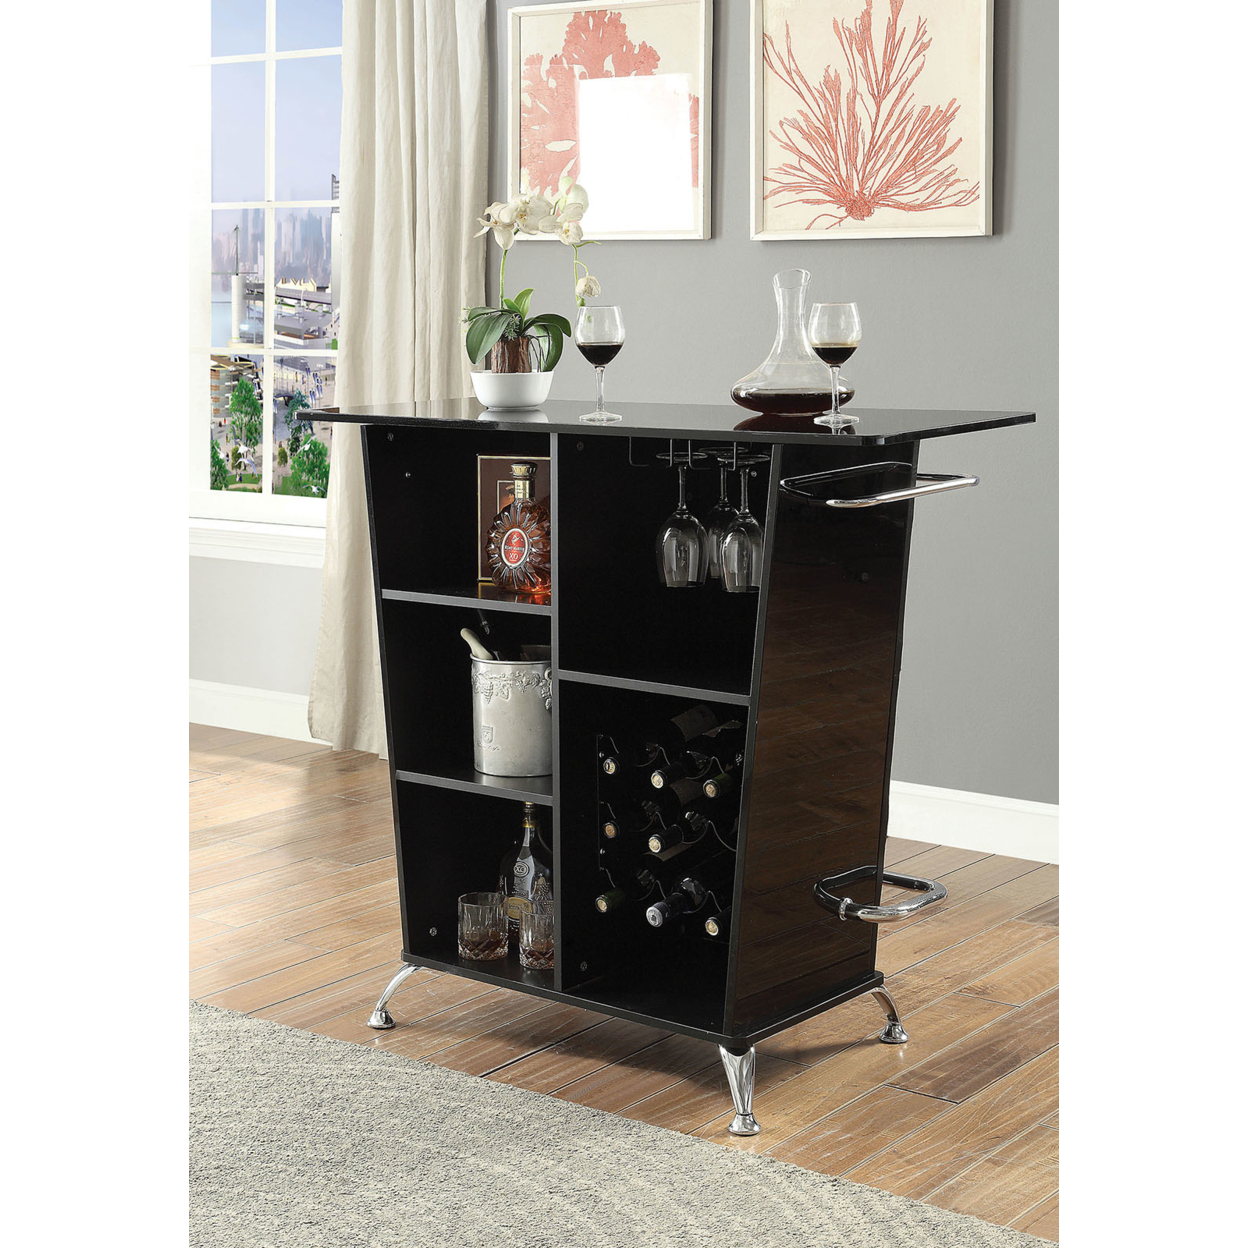 Contemporary Style Leatherette Padded Bar Table With Button Tufting, Black- Saltoro Sherpi